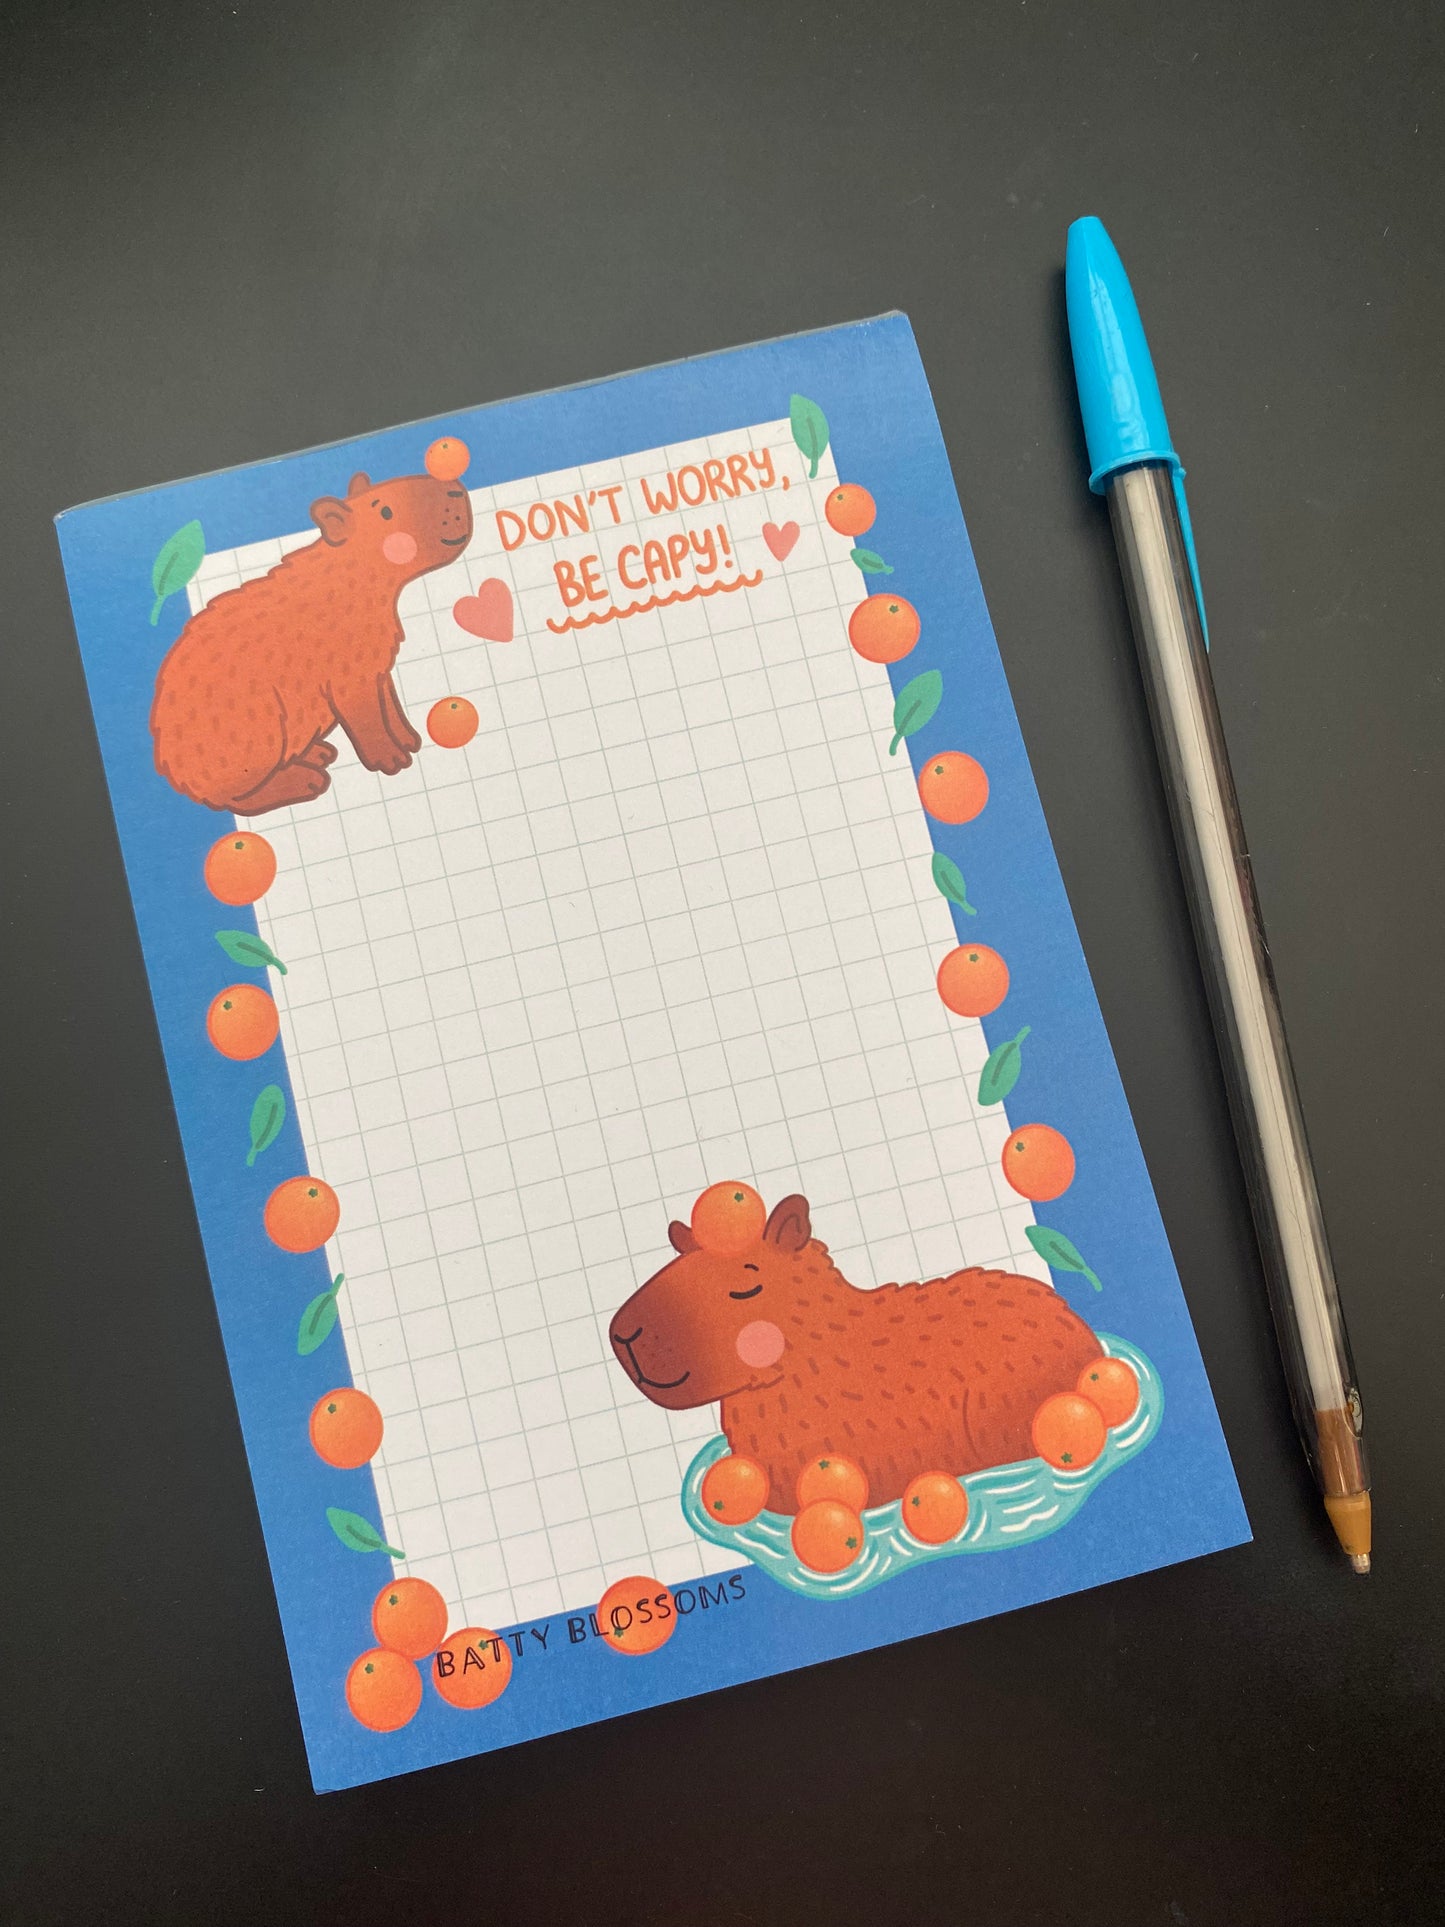 'Don't Worry Be Capy' memo pad